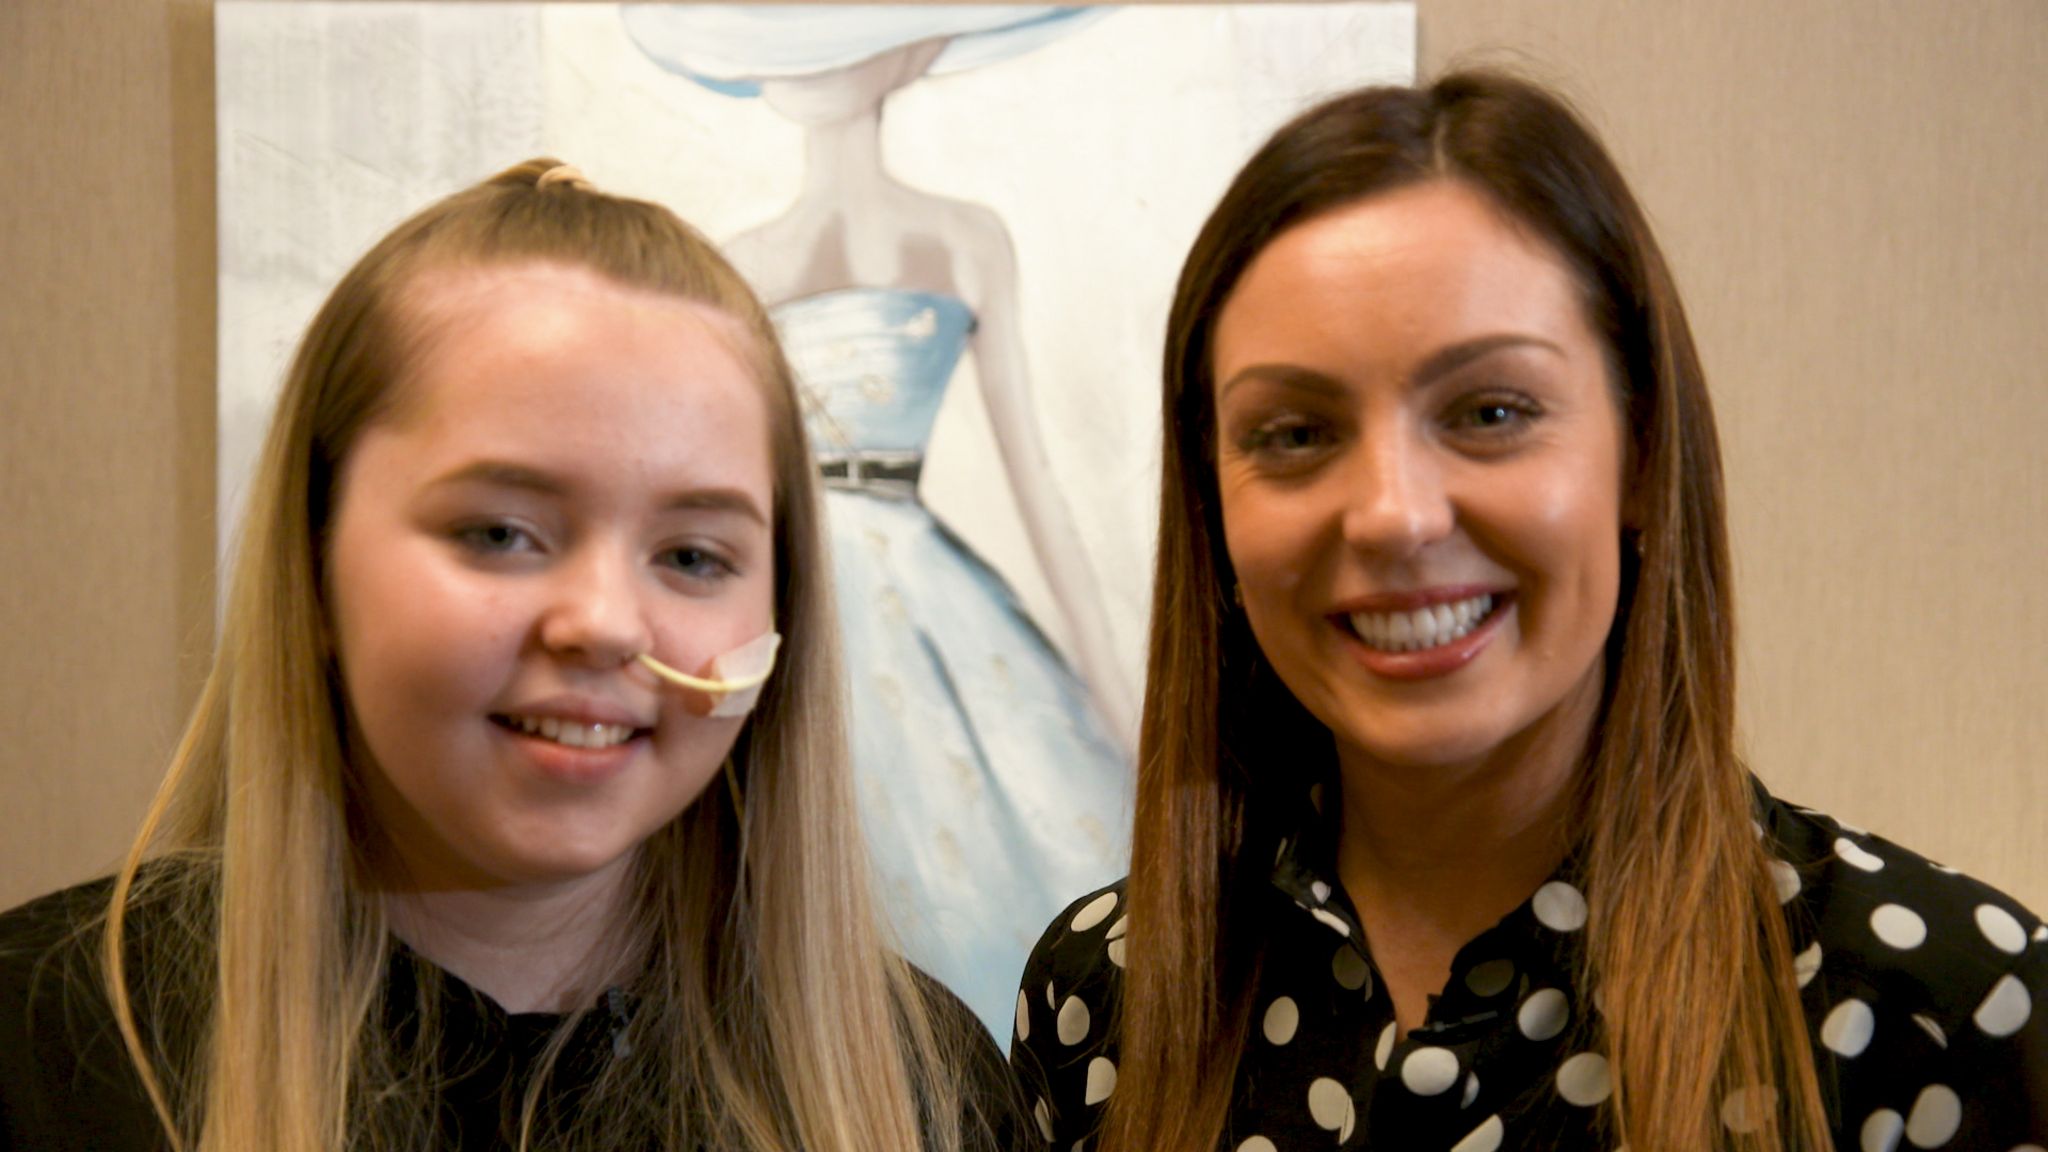 Amy-Dowden-from-strictly-with-a-young-sufferer-with-Crohn's-disease.